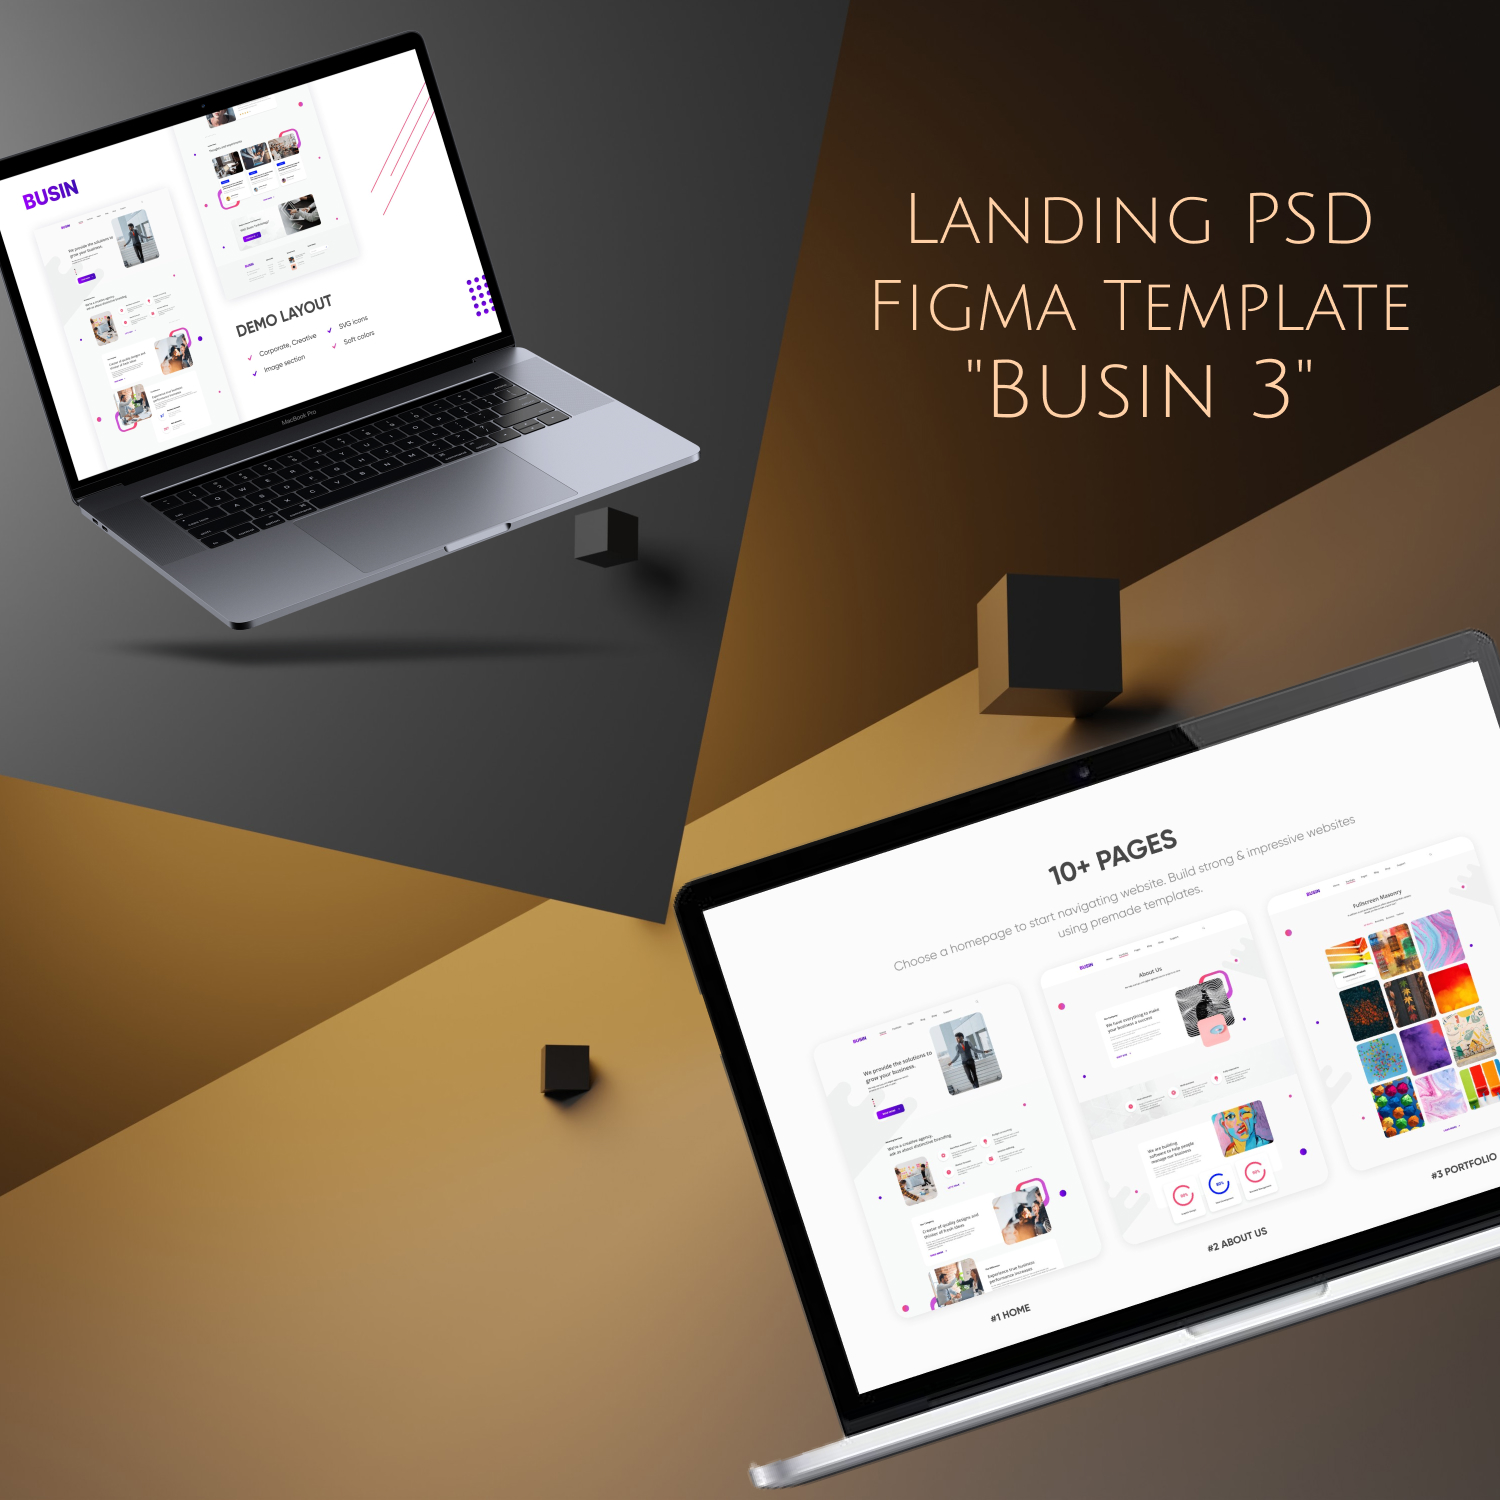 Landing PSD Figma Template "Busin 3" cover image.